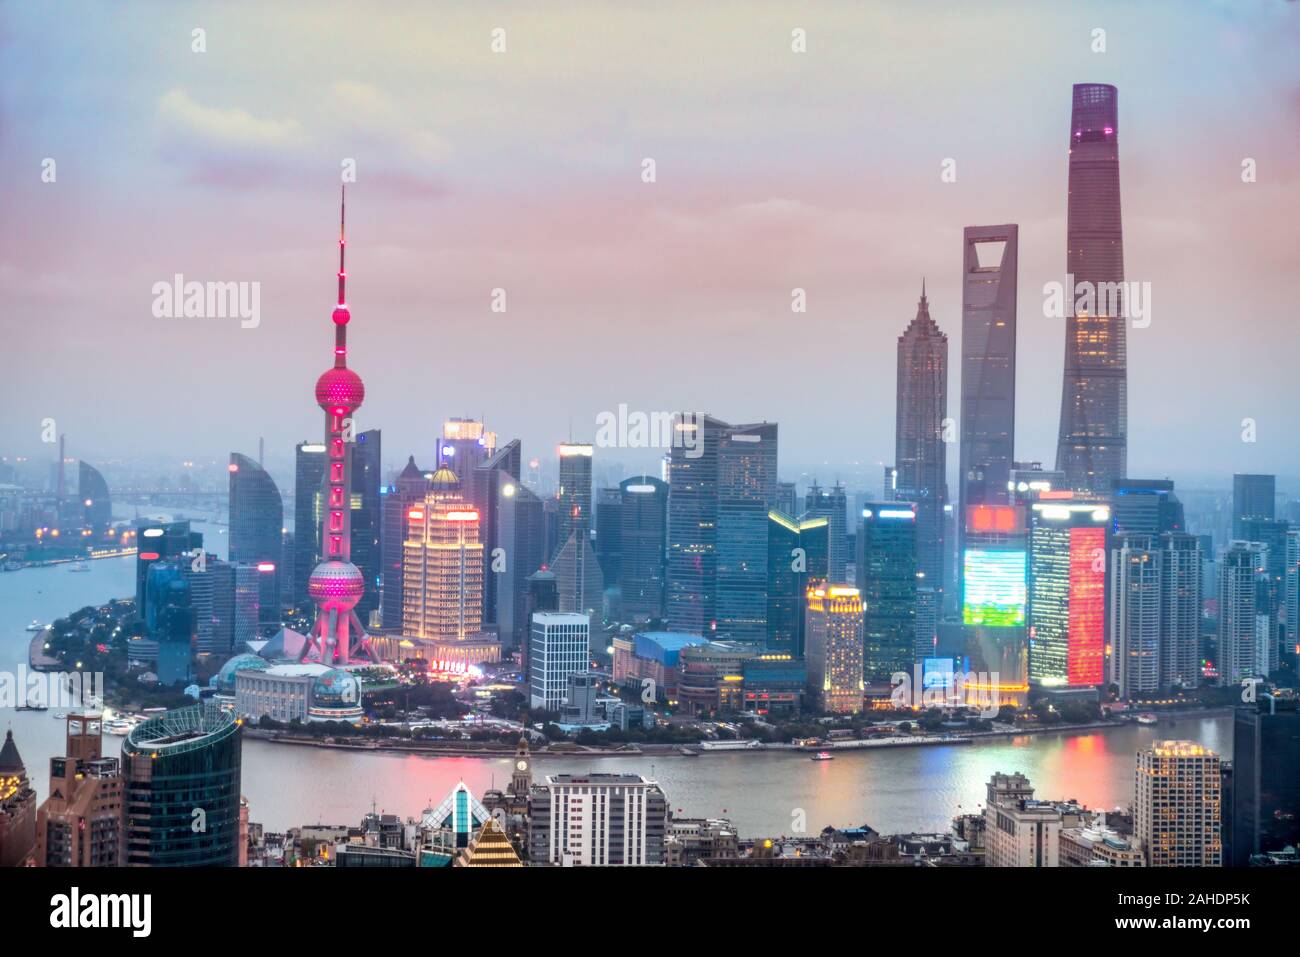 Shanghai city skyline, view of the skyscrapers of Pudong and huangpu River. Shanghai, China. Stock Photo